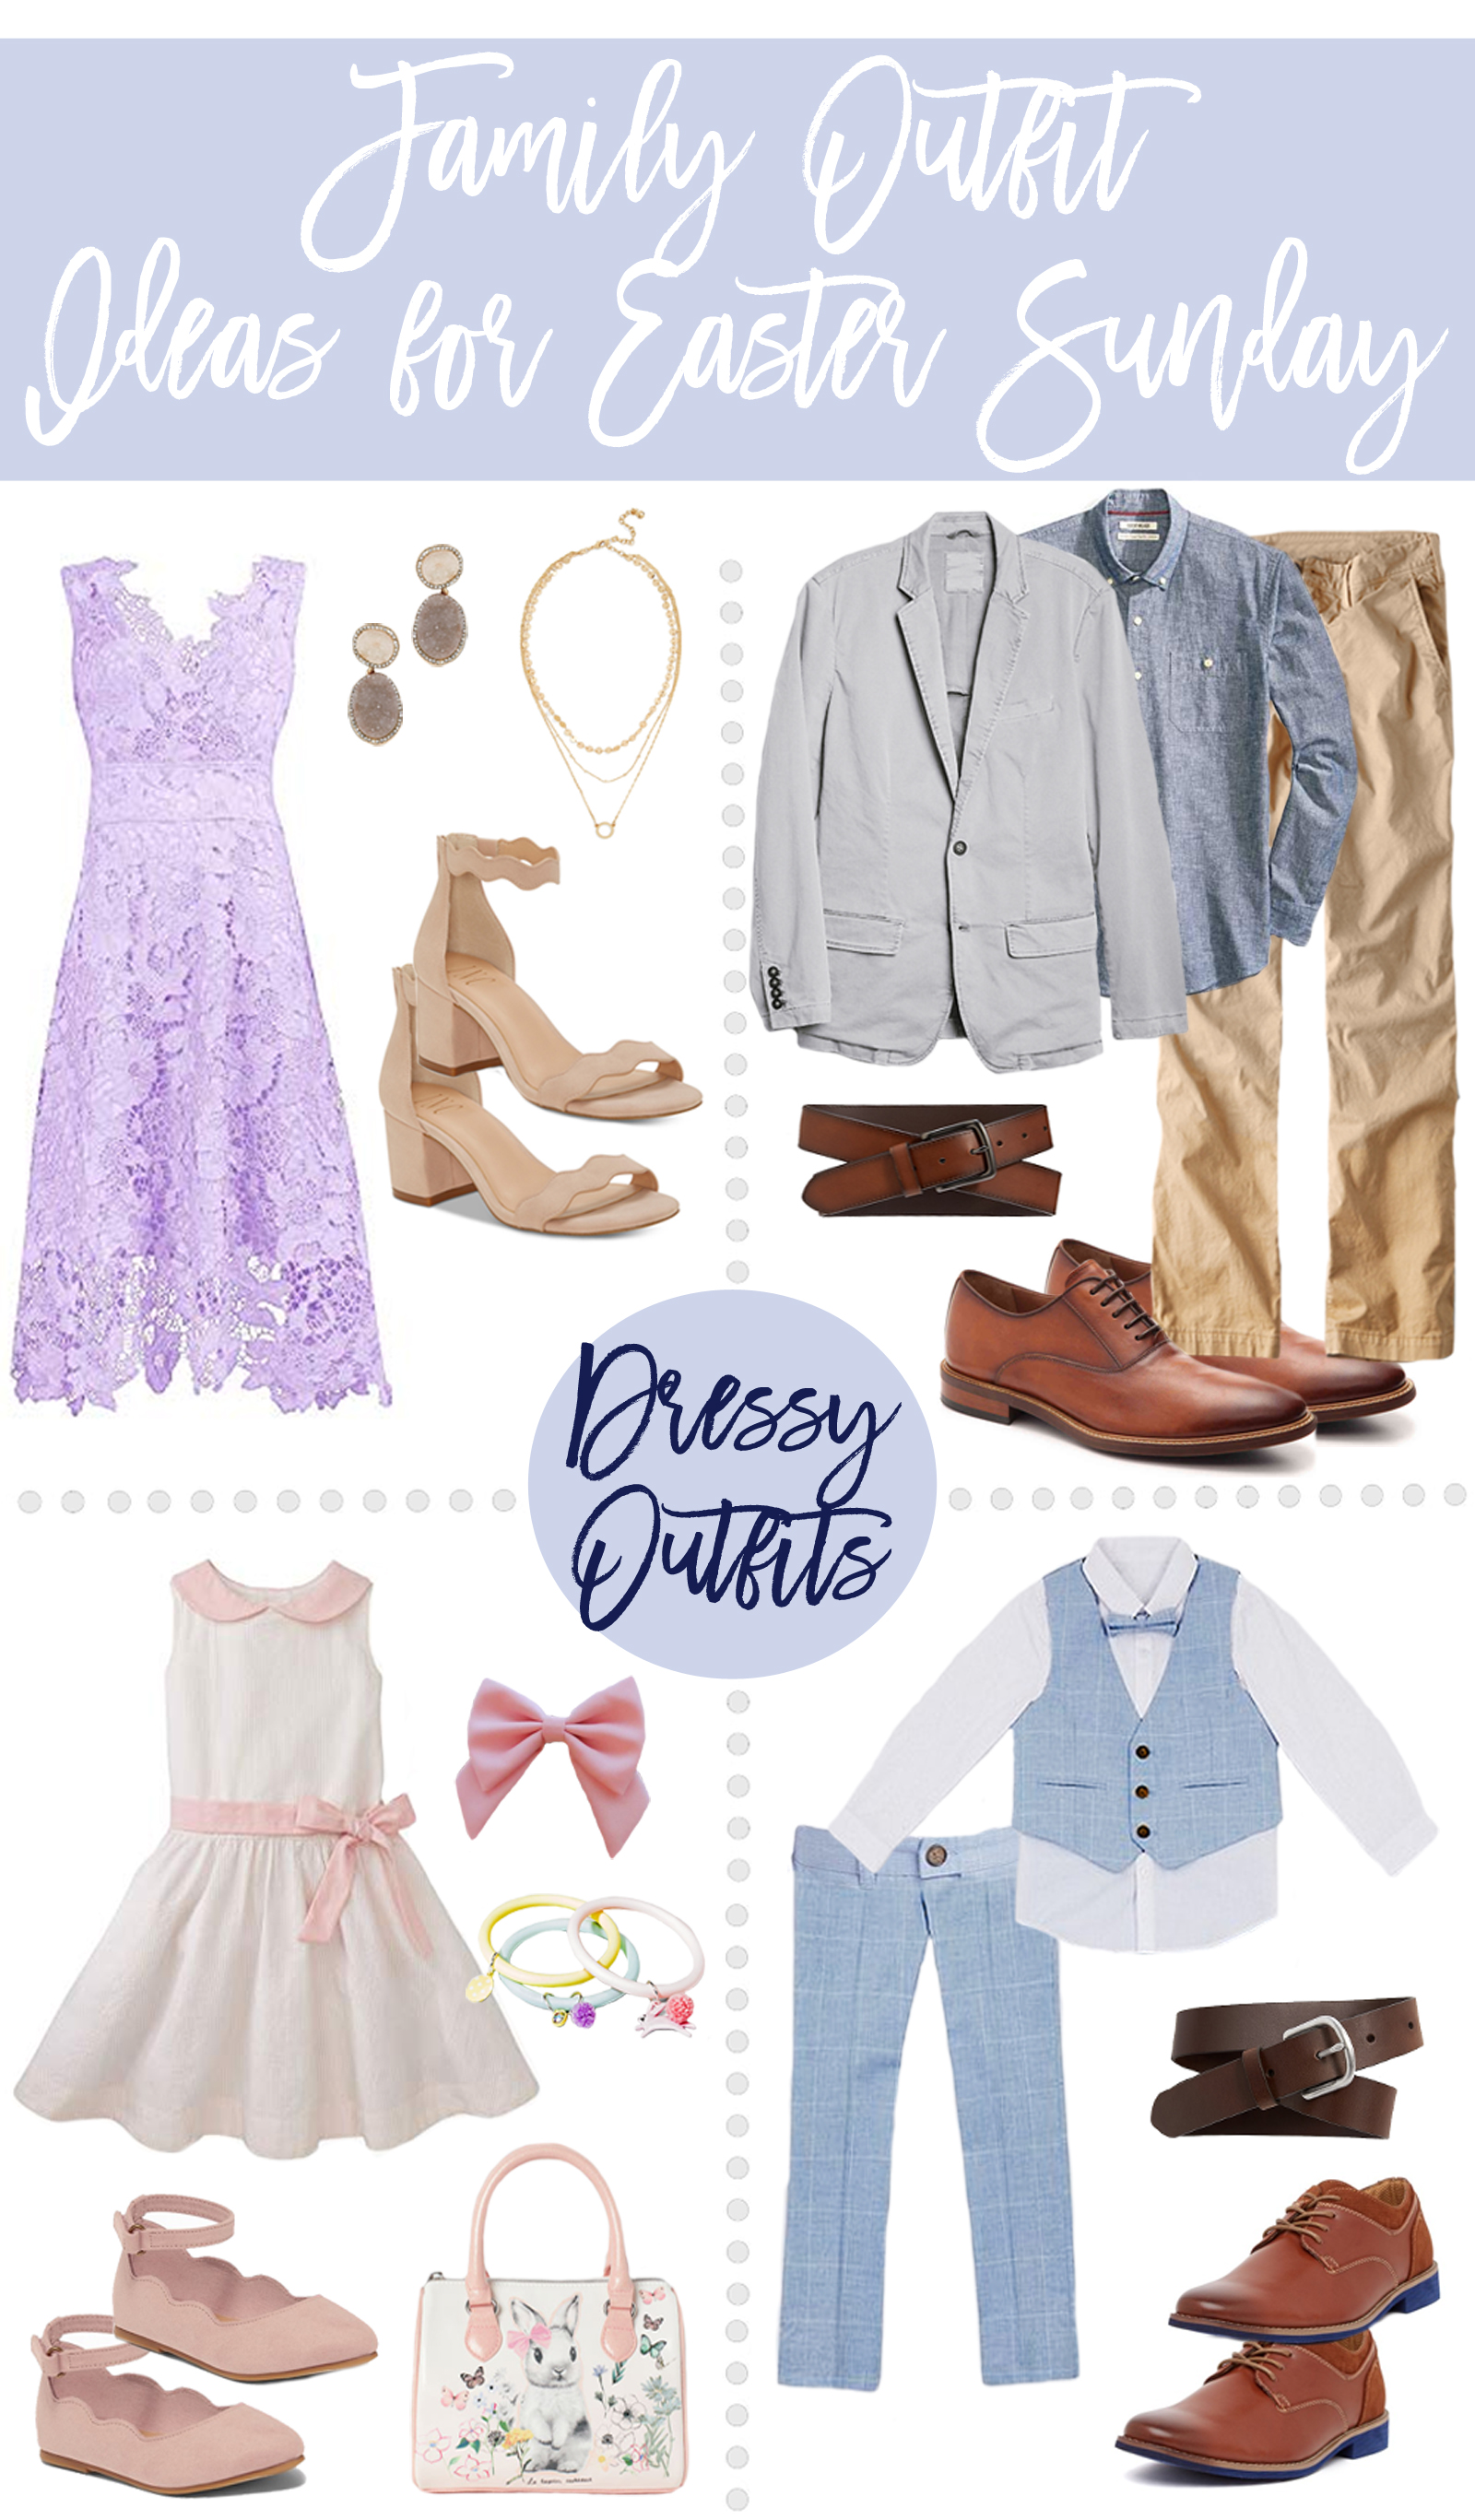 Family Easter Outfit Ideas - Casual and 